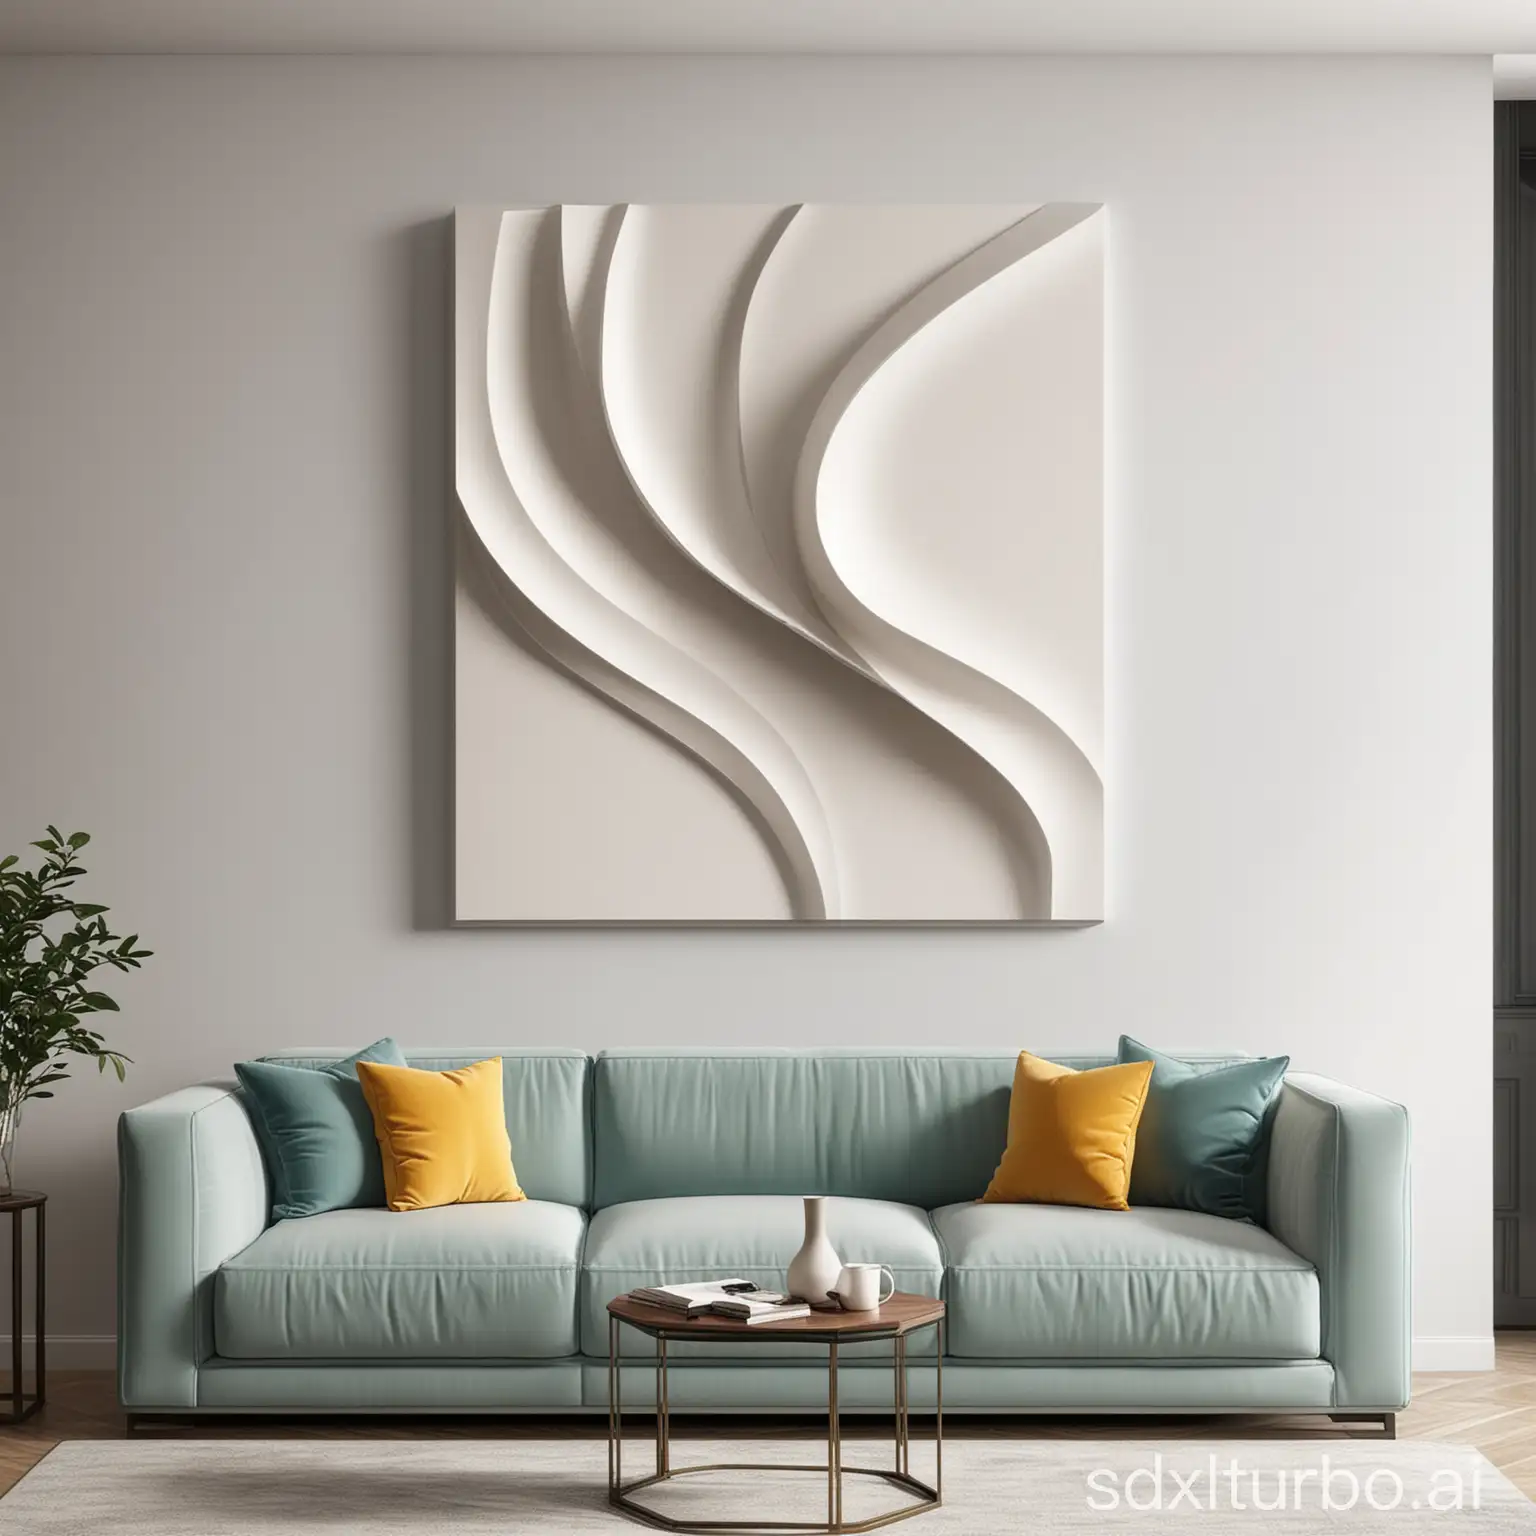 Abstract wall art, 3D sculpture, bold shape, background is living room, rectangle canvas,horizontal, smooth surface, living room, elegant minimalist design, modern home decor, real life, front view